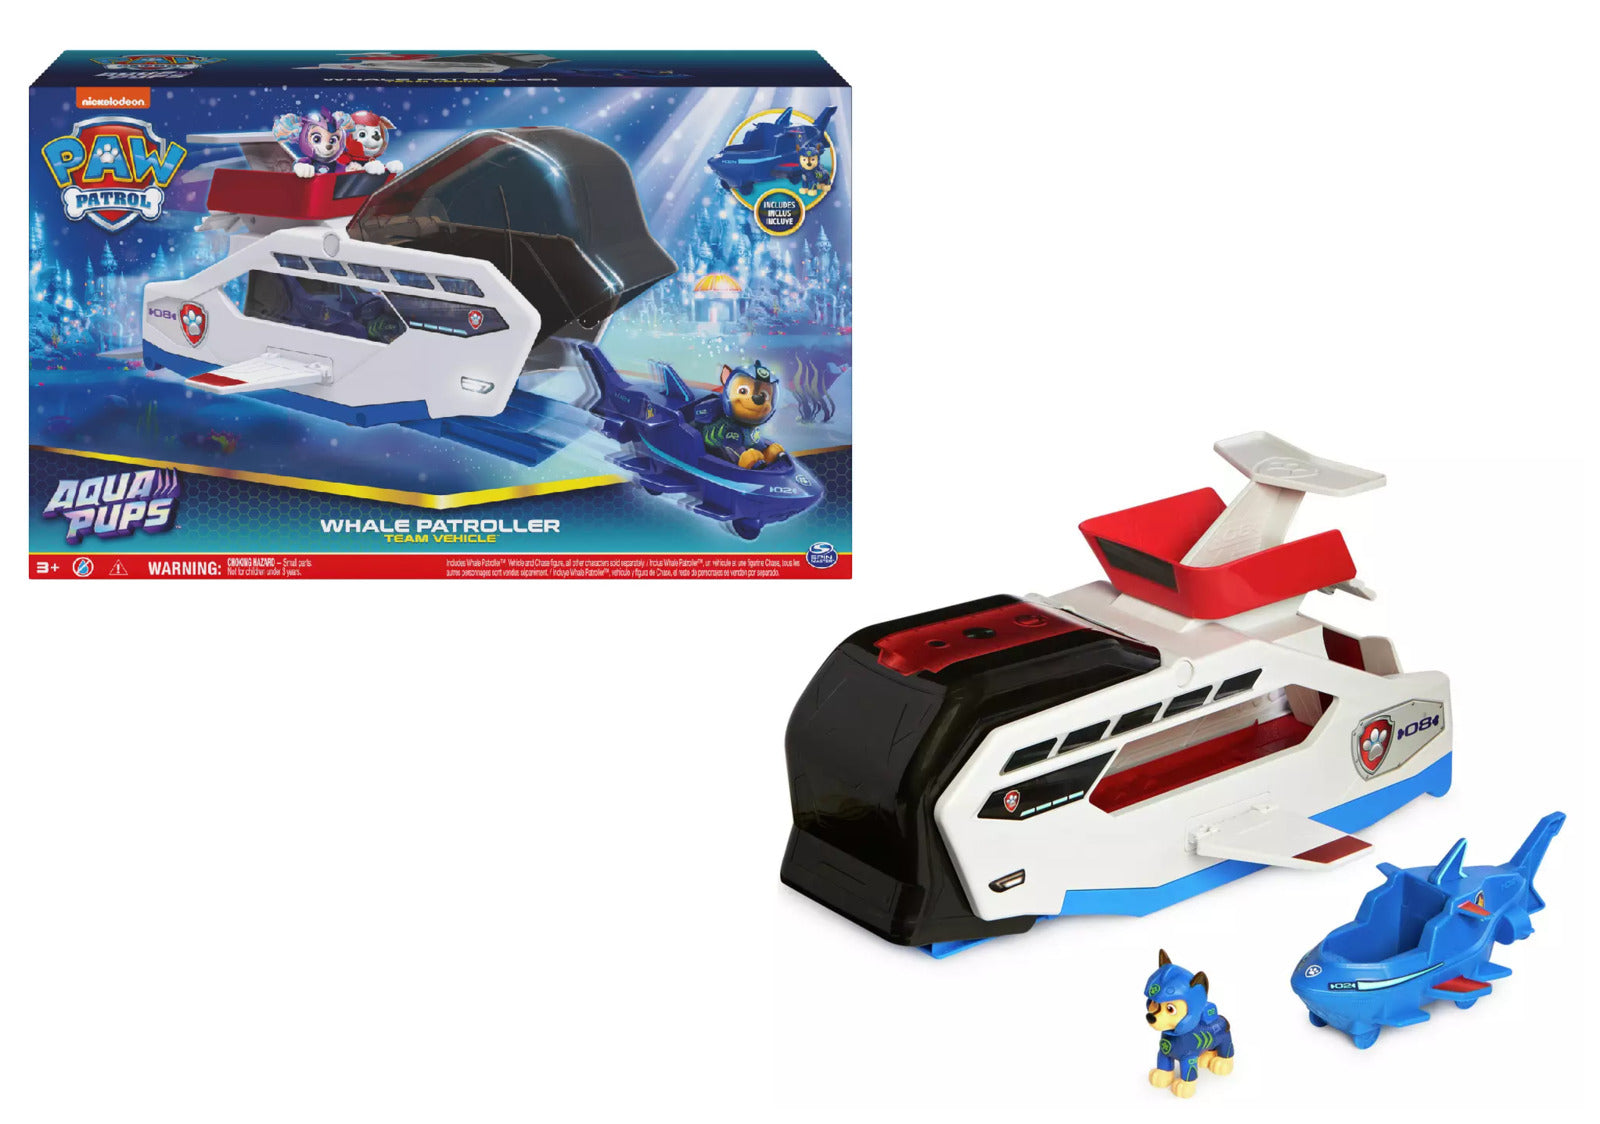 Paw Patrol Aqua Pups Whale Patroller Team Vehicle with Chase Action Figure,  Toy Car and Vehicle Launcher, Kids Toys for Ages 3 and up